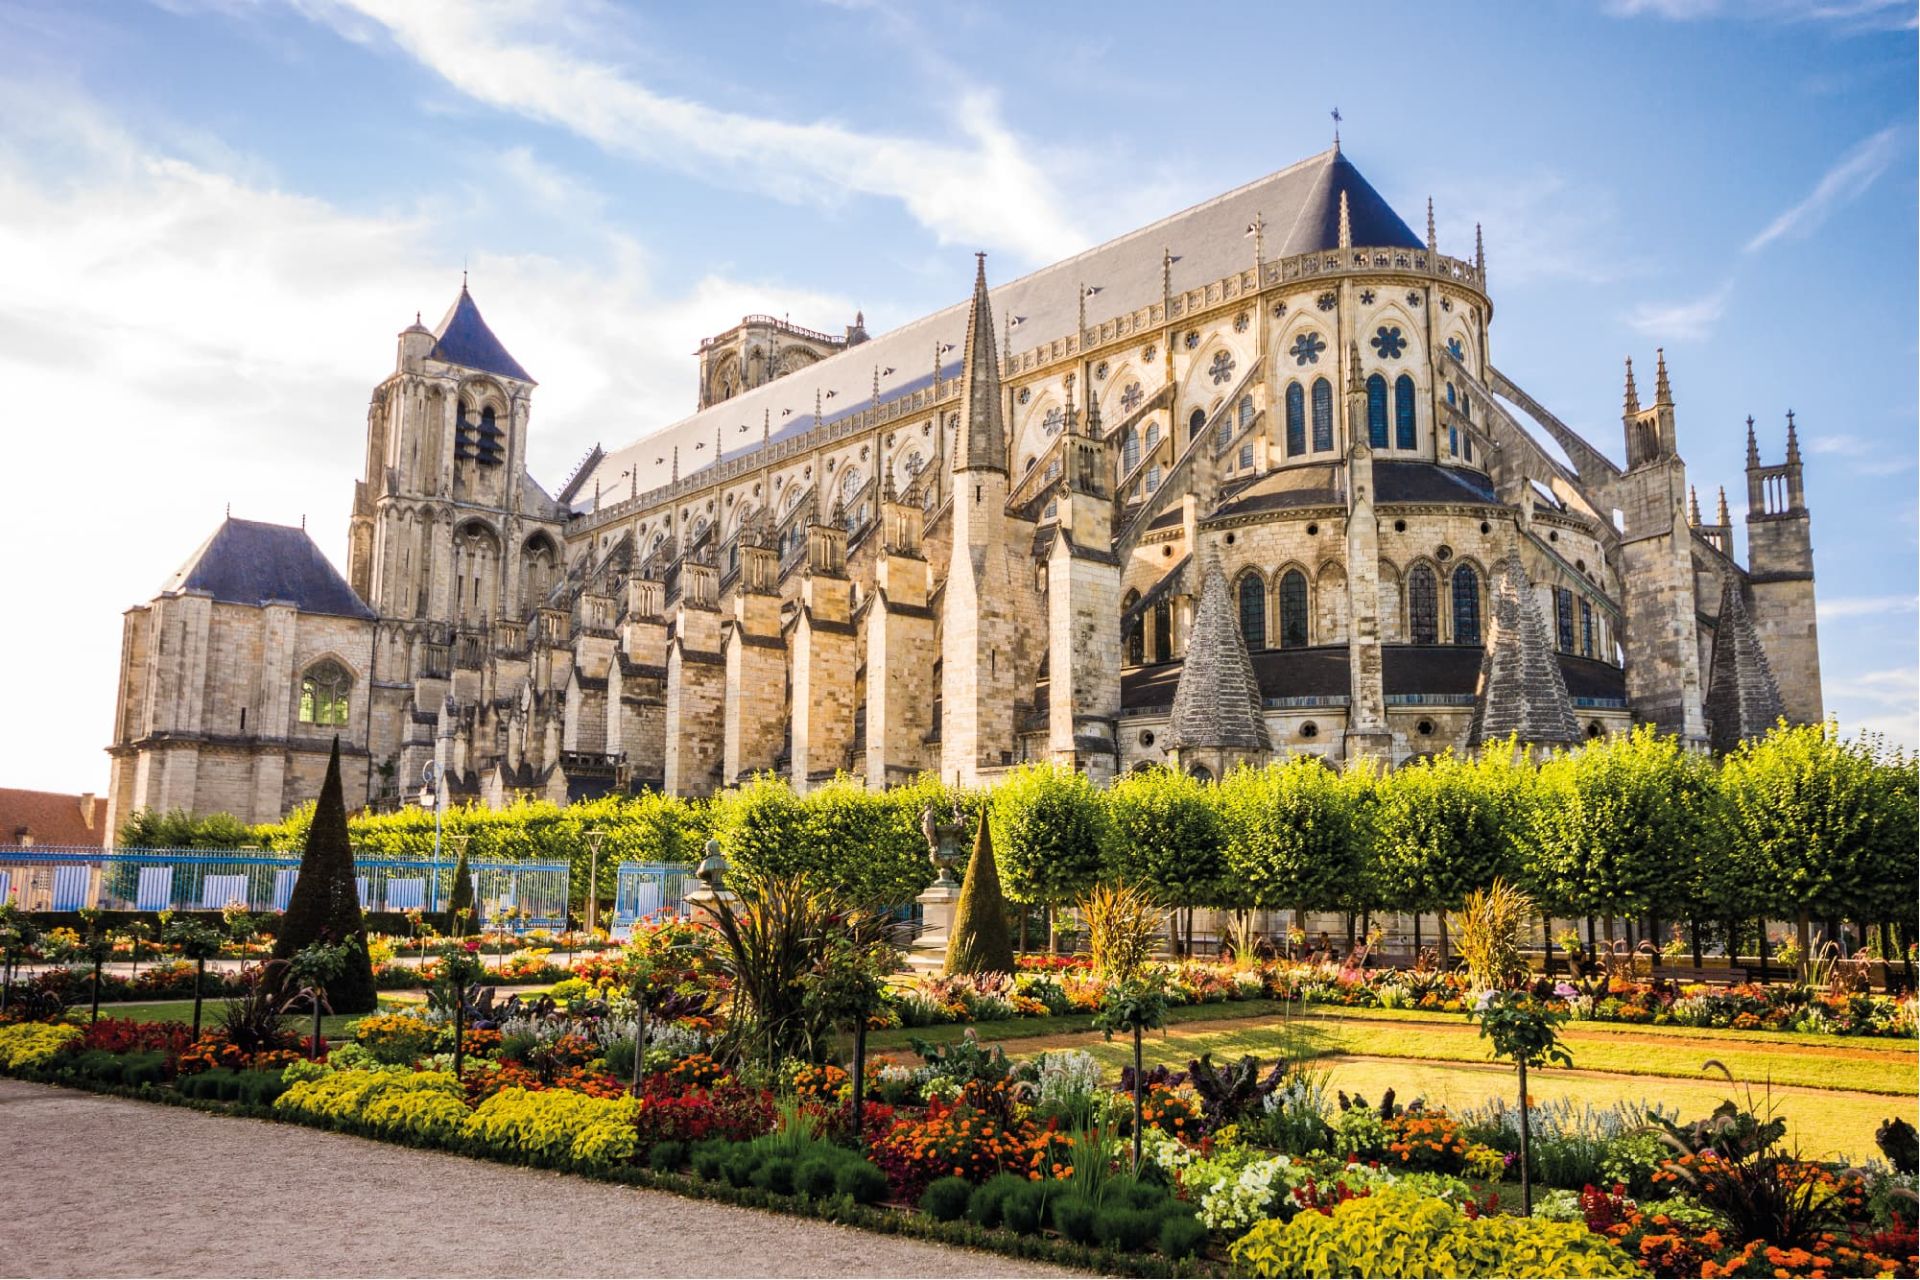 Fișier:Cathedrale bourges 2.JPG